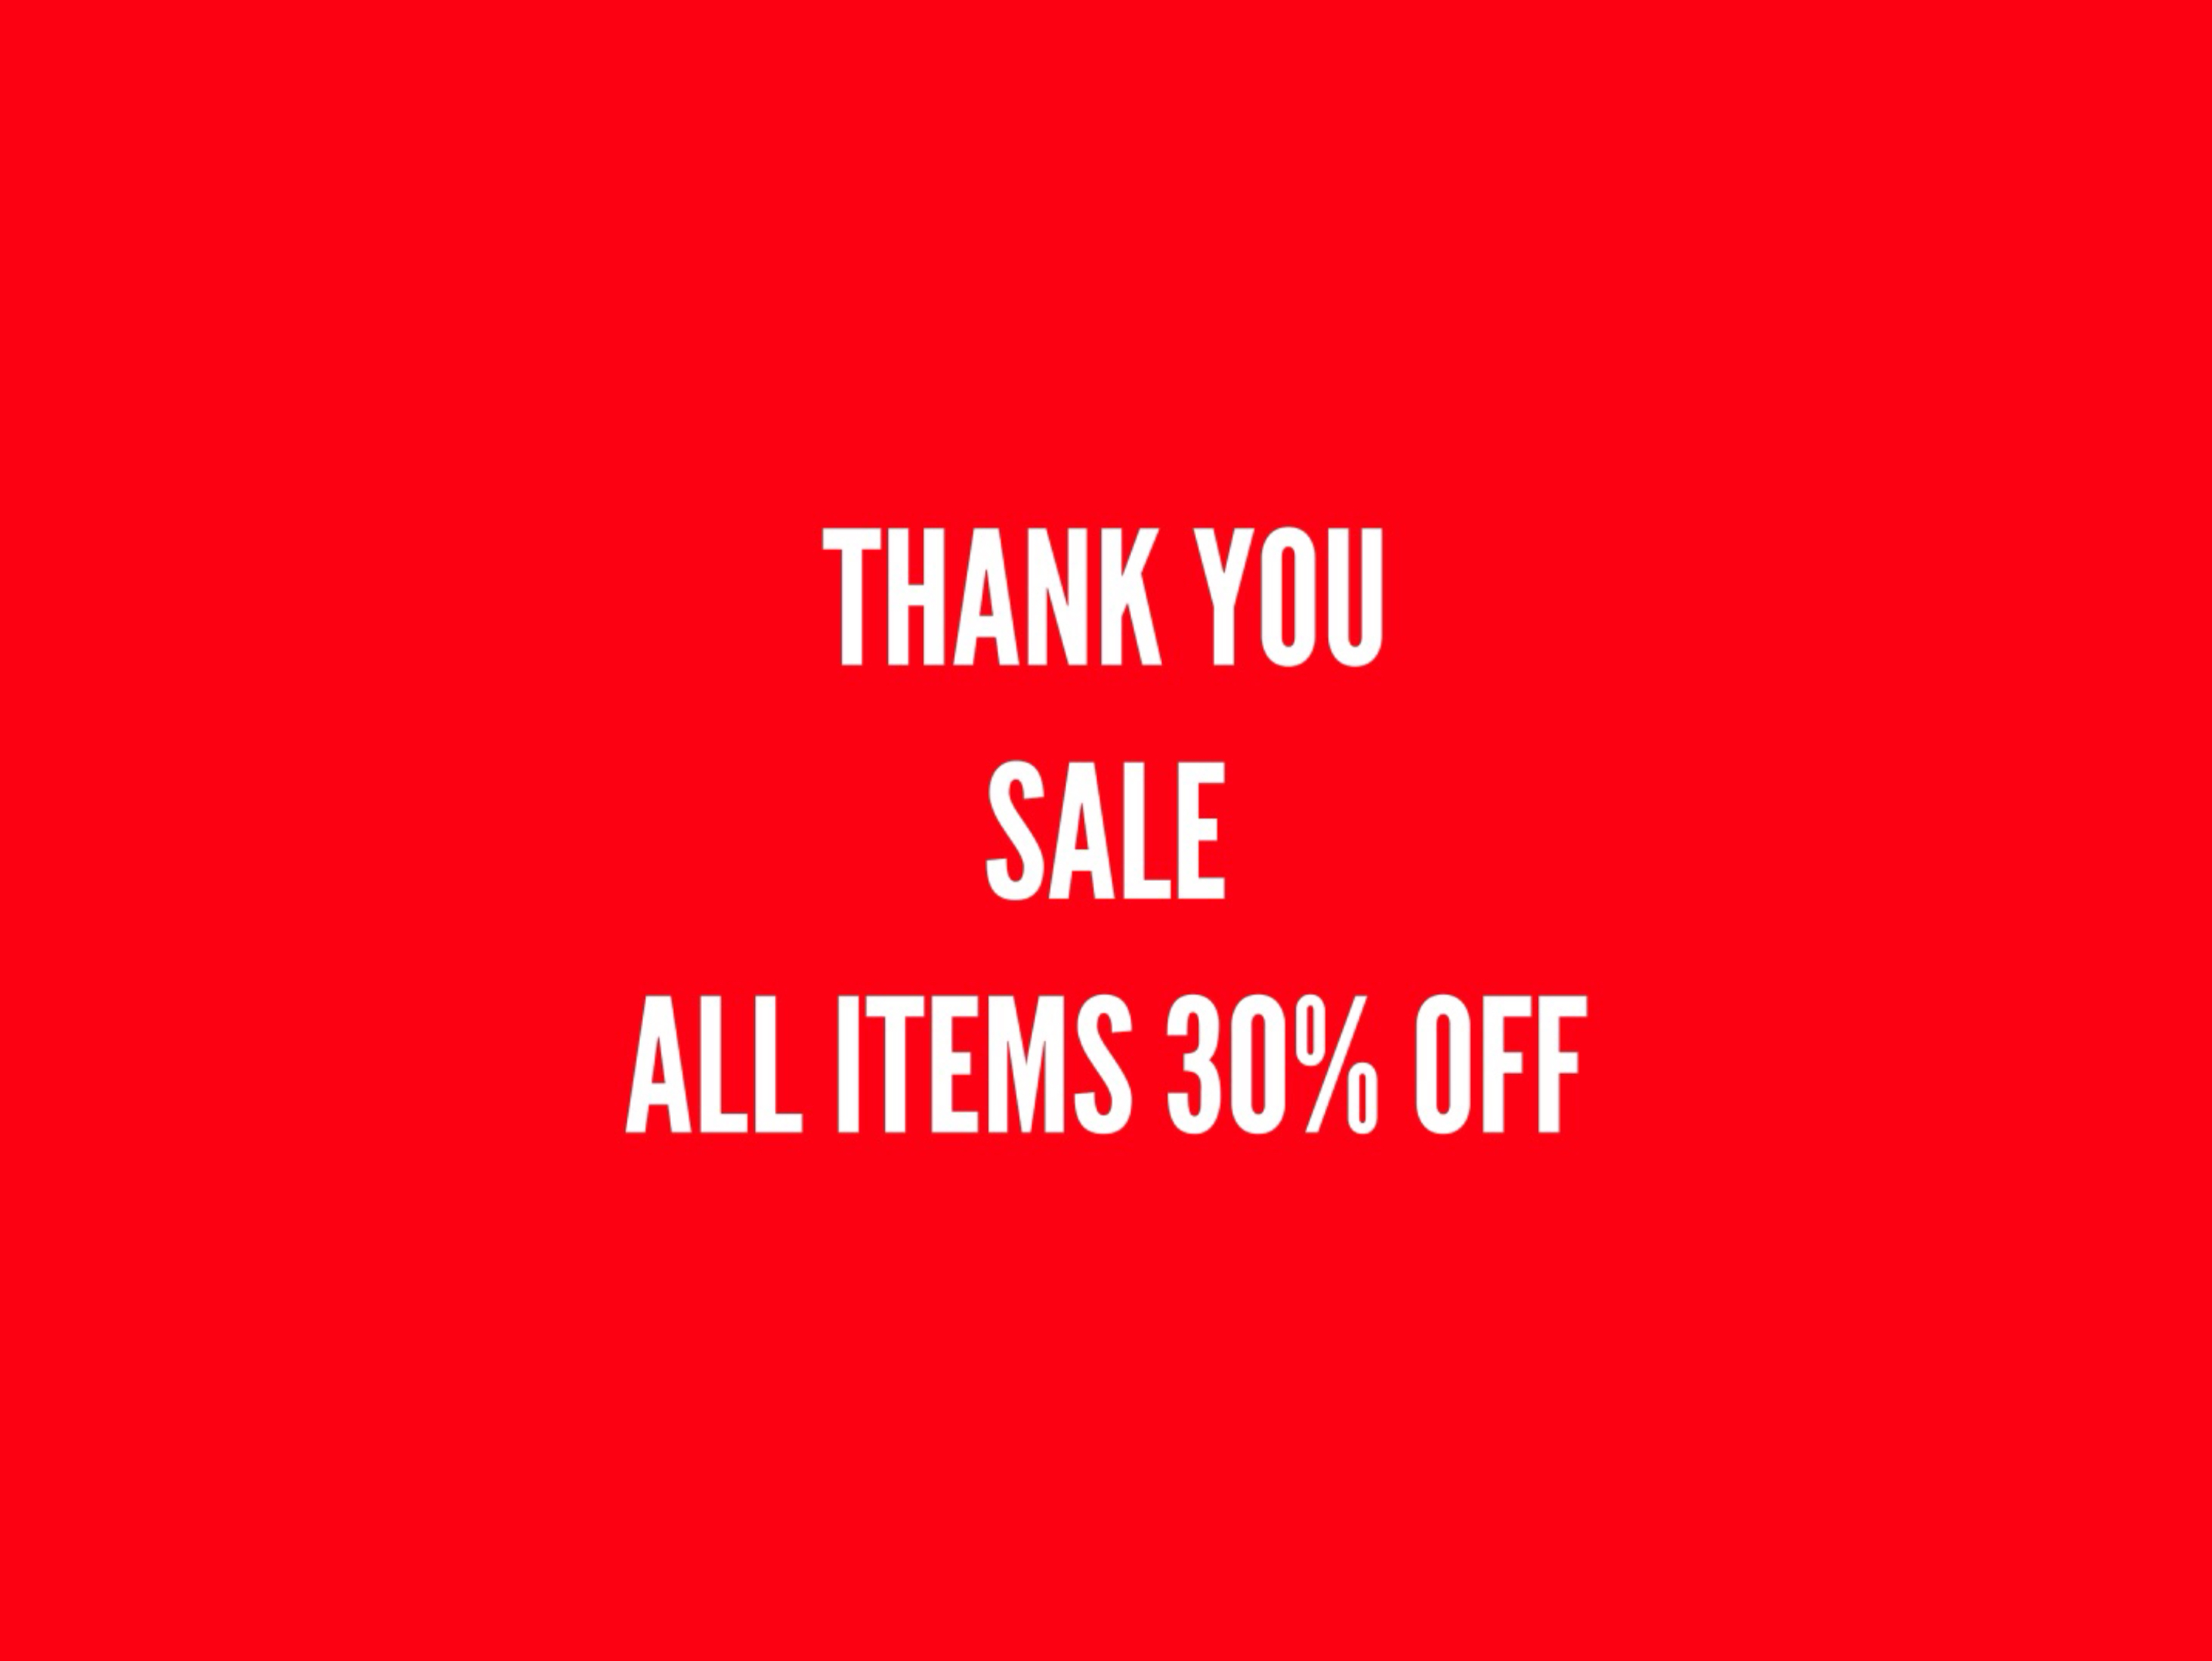 ＜THANK YOU SALE＞30%OFFセールは3/21に終了が決定！